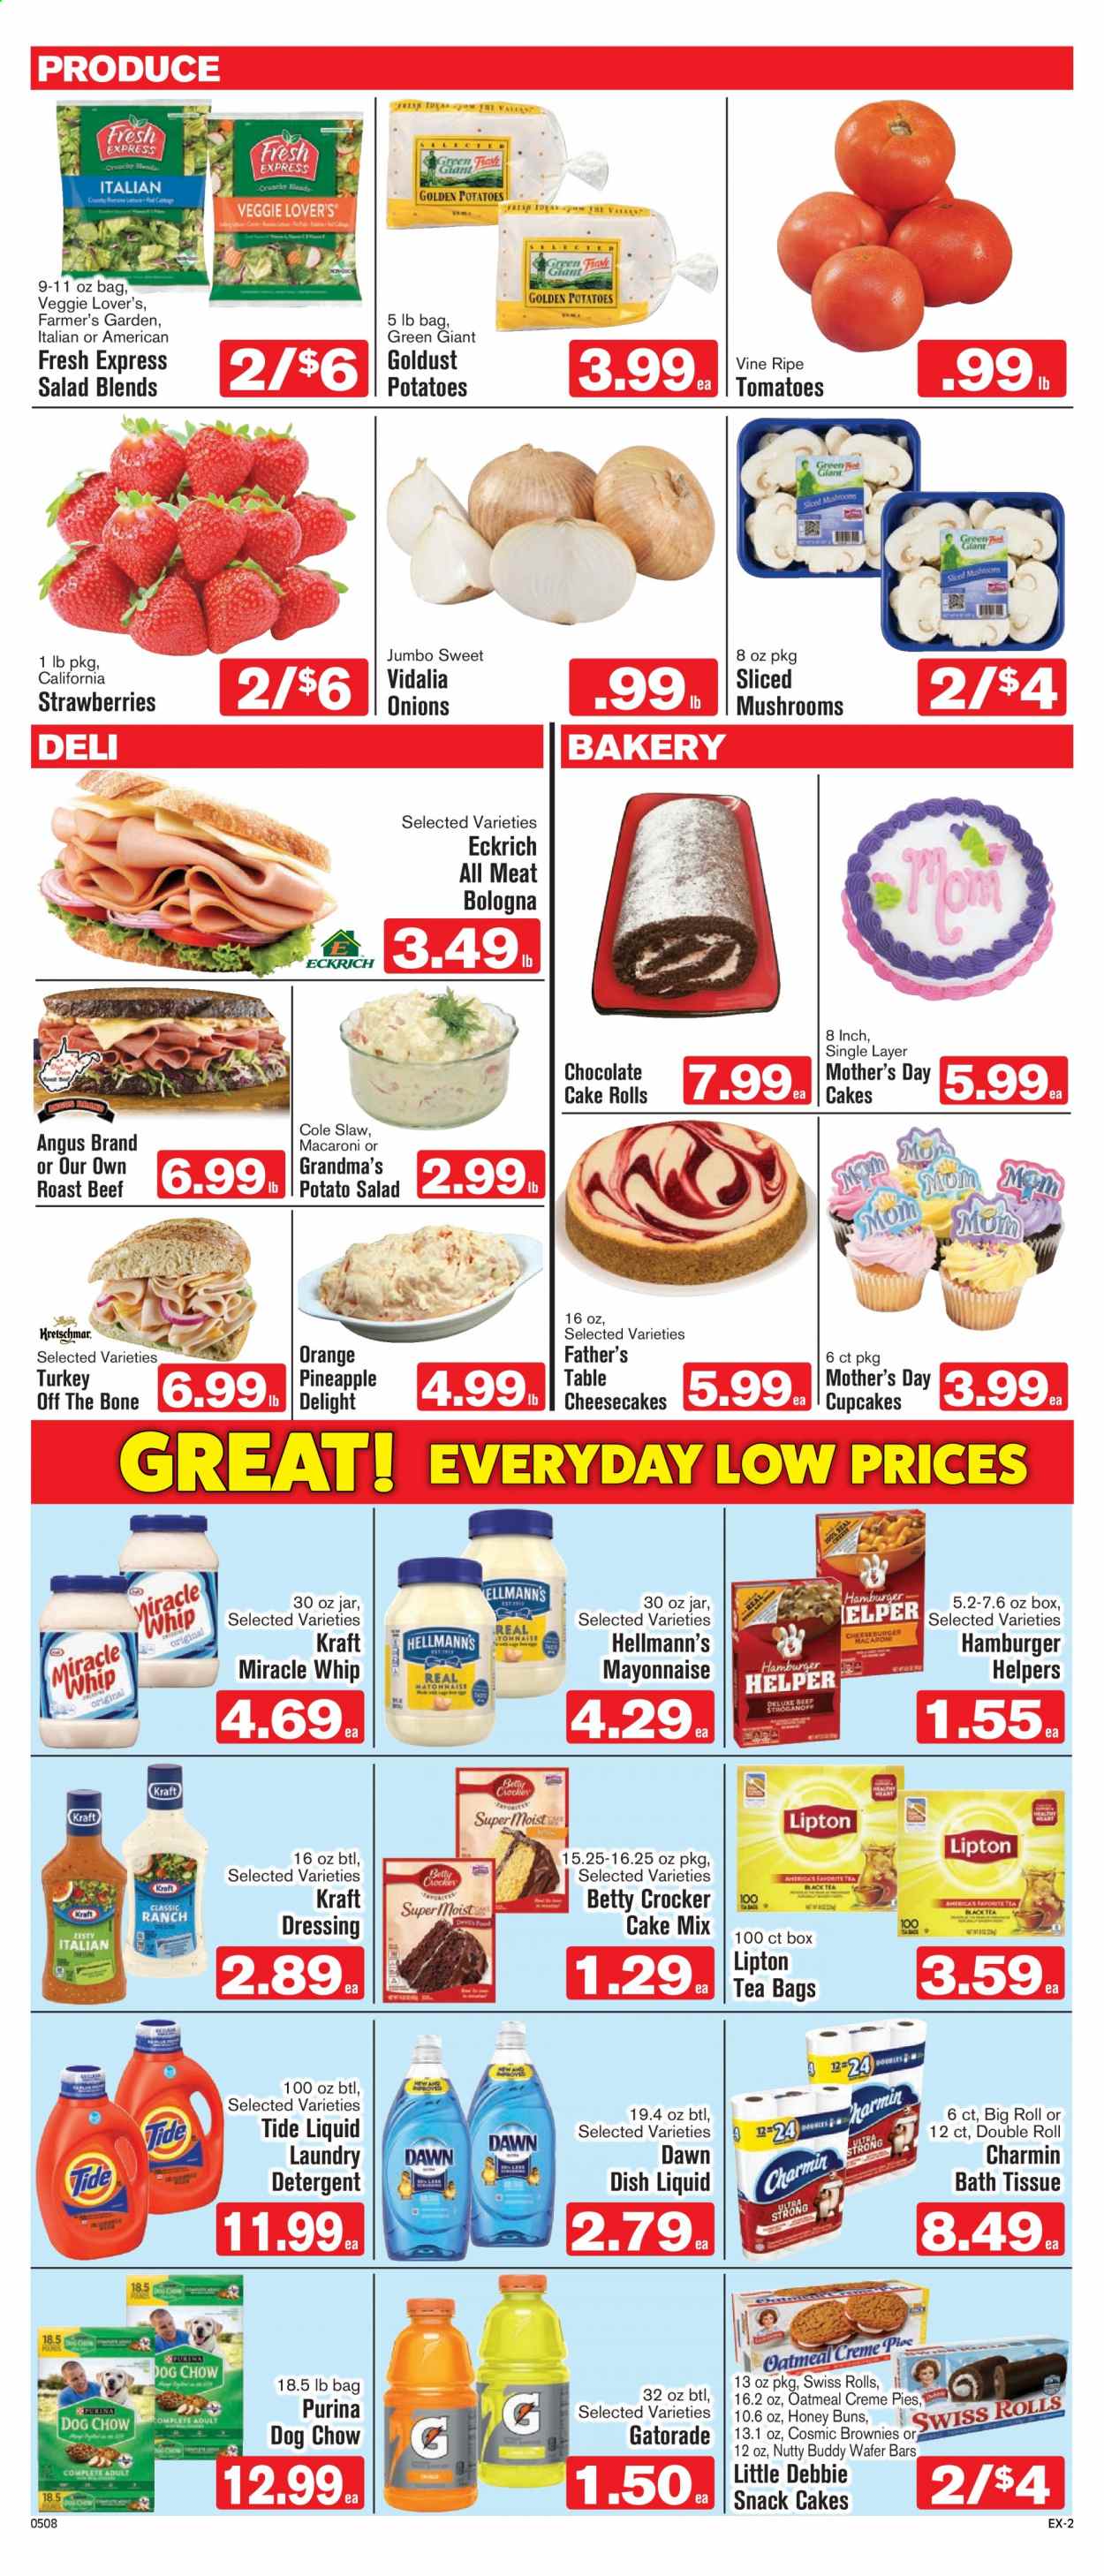 thumbnail - Shop ‘n Save Express Flyer - 05/08/2021 - 05/14/2021 - Sales products - mushrooms, buns, Father's Table, cupcake, brownies, chocolate cake, cake mix, tomatoes, potatoes, onion, salad, strawberries, pineapple, oranges, beef meat, roast beef, hamburger, macaroni, Kraft®, potato salad, mayonnaise, Miracle Whip, Hellmann’s, wafers, chocolate, snack, oatmeal, dressing, honey, Lipton, Gatorade, tea bags, bath tissue, Charmin, detergent, Tide, laundry detergent, dishwashing liquid, Dog Chow, Purina. Page 2.